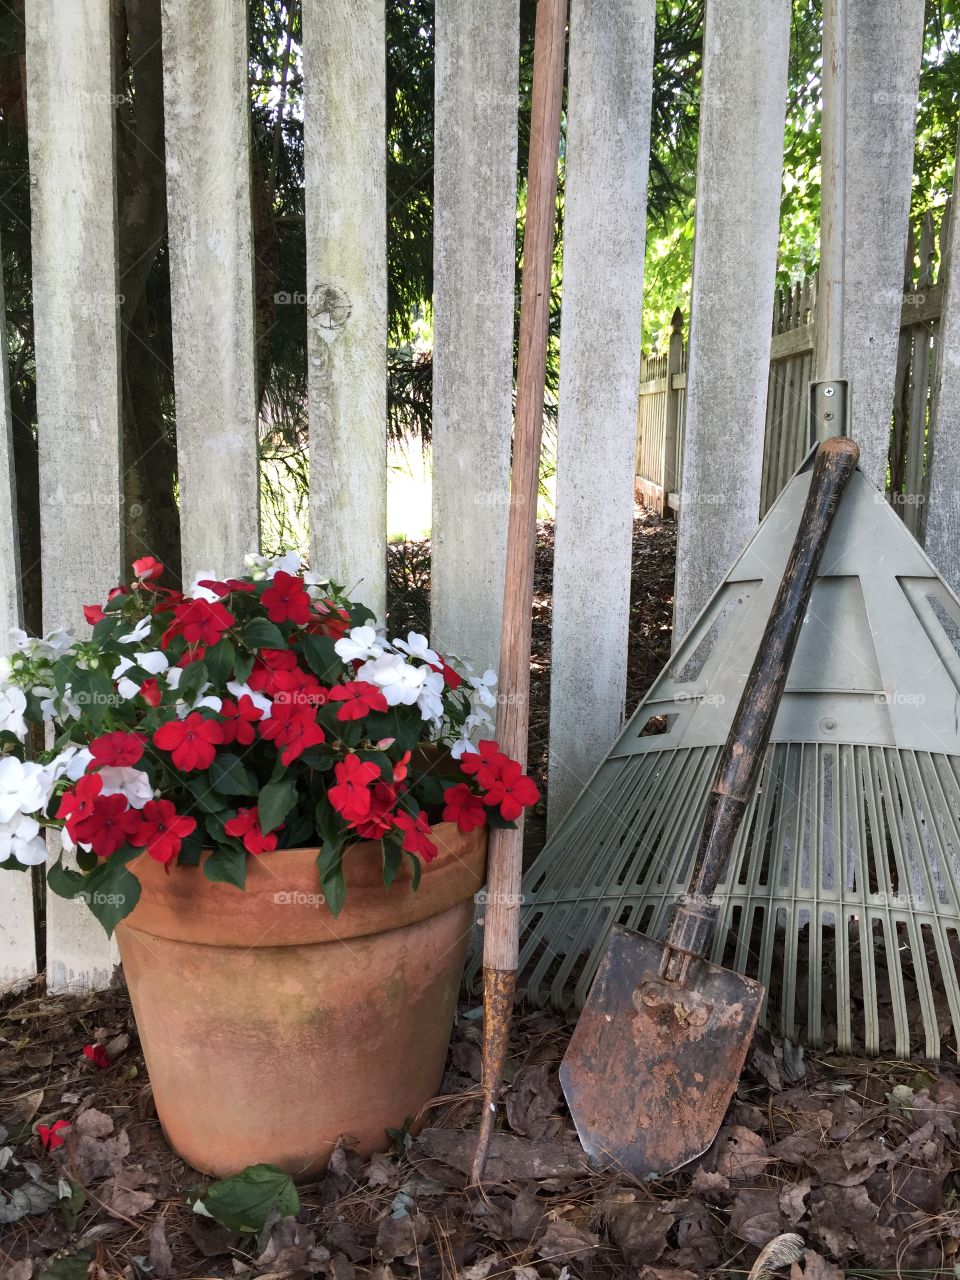 Garden tools and flowers